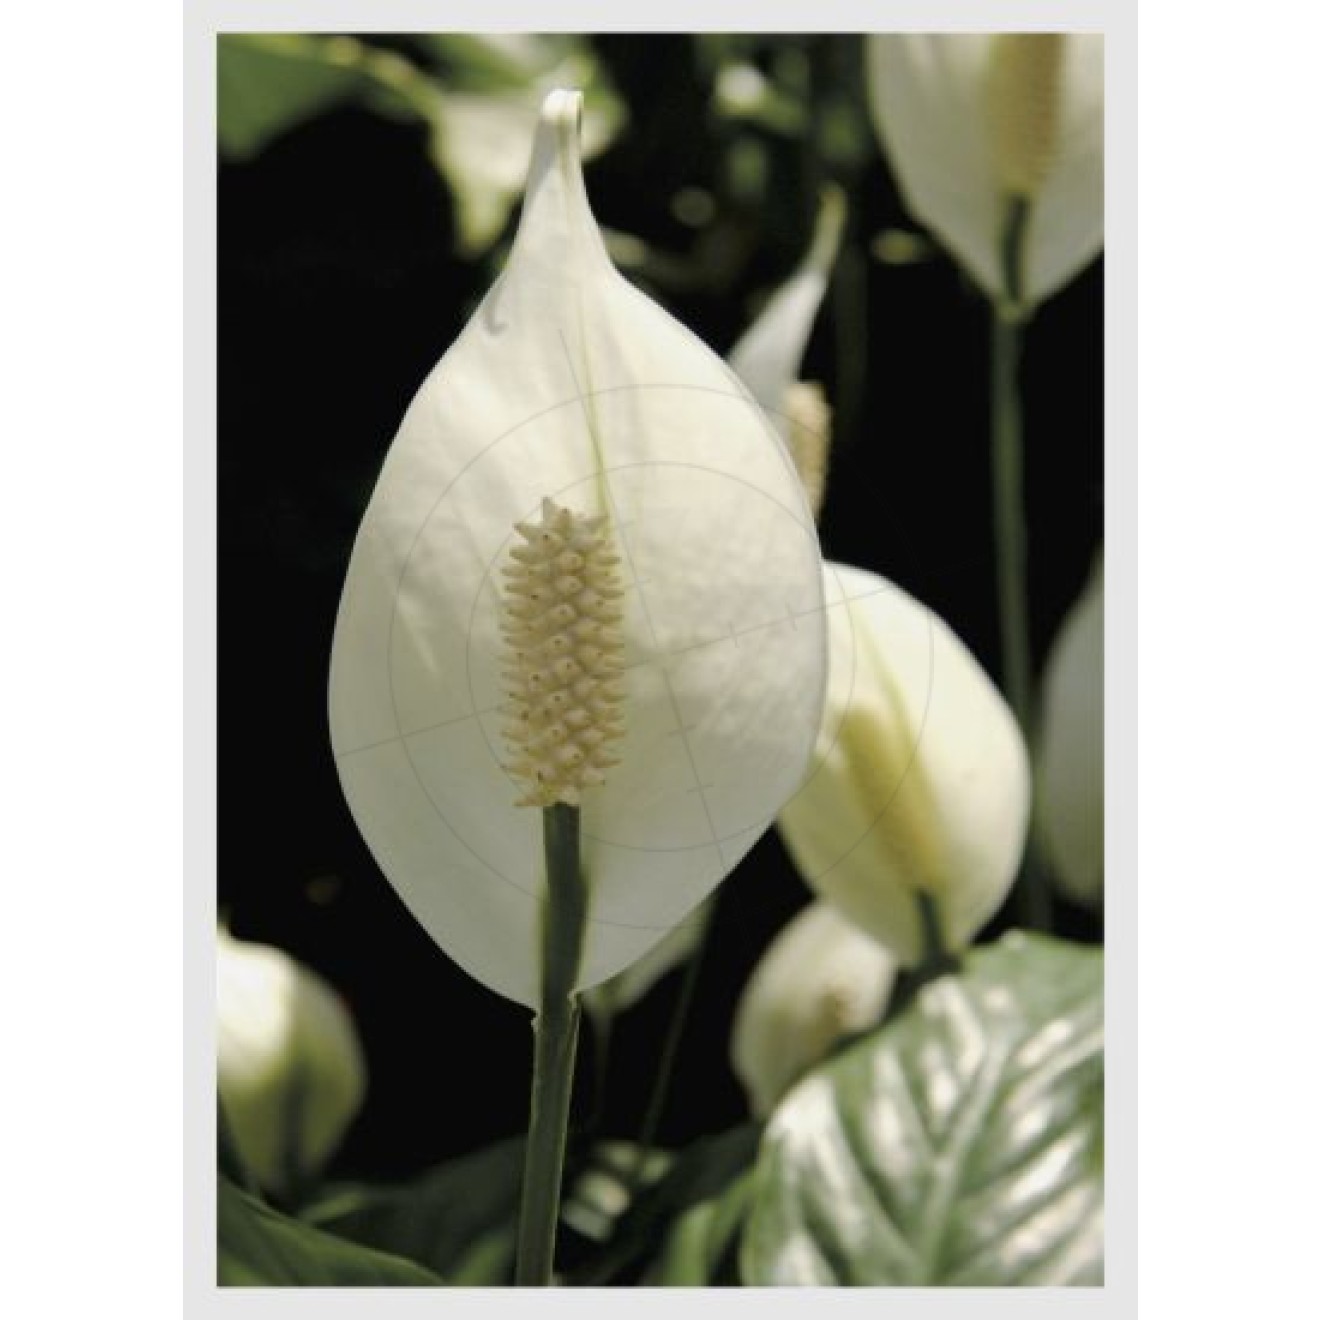 Spathiphyllum or peace lily